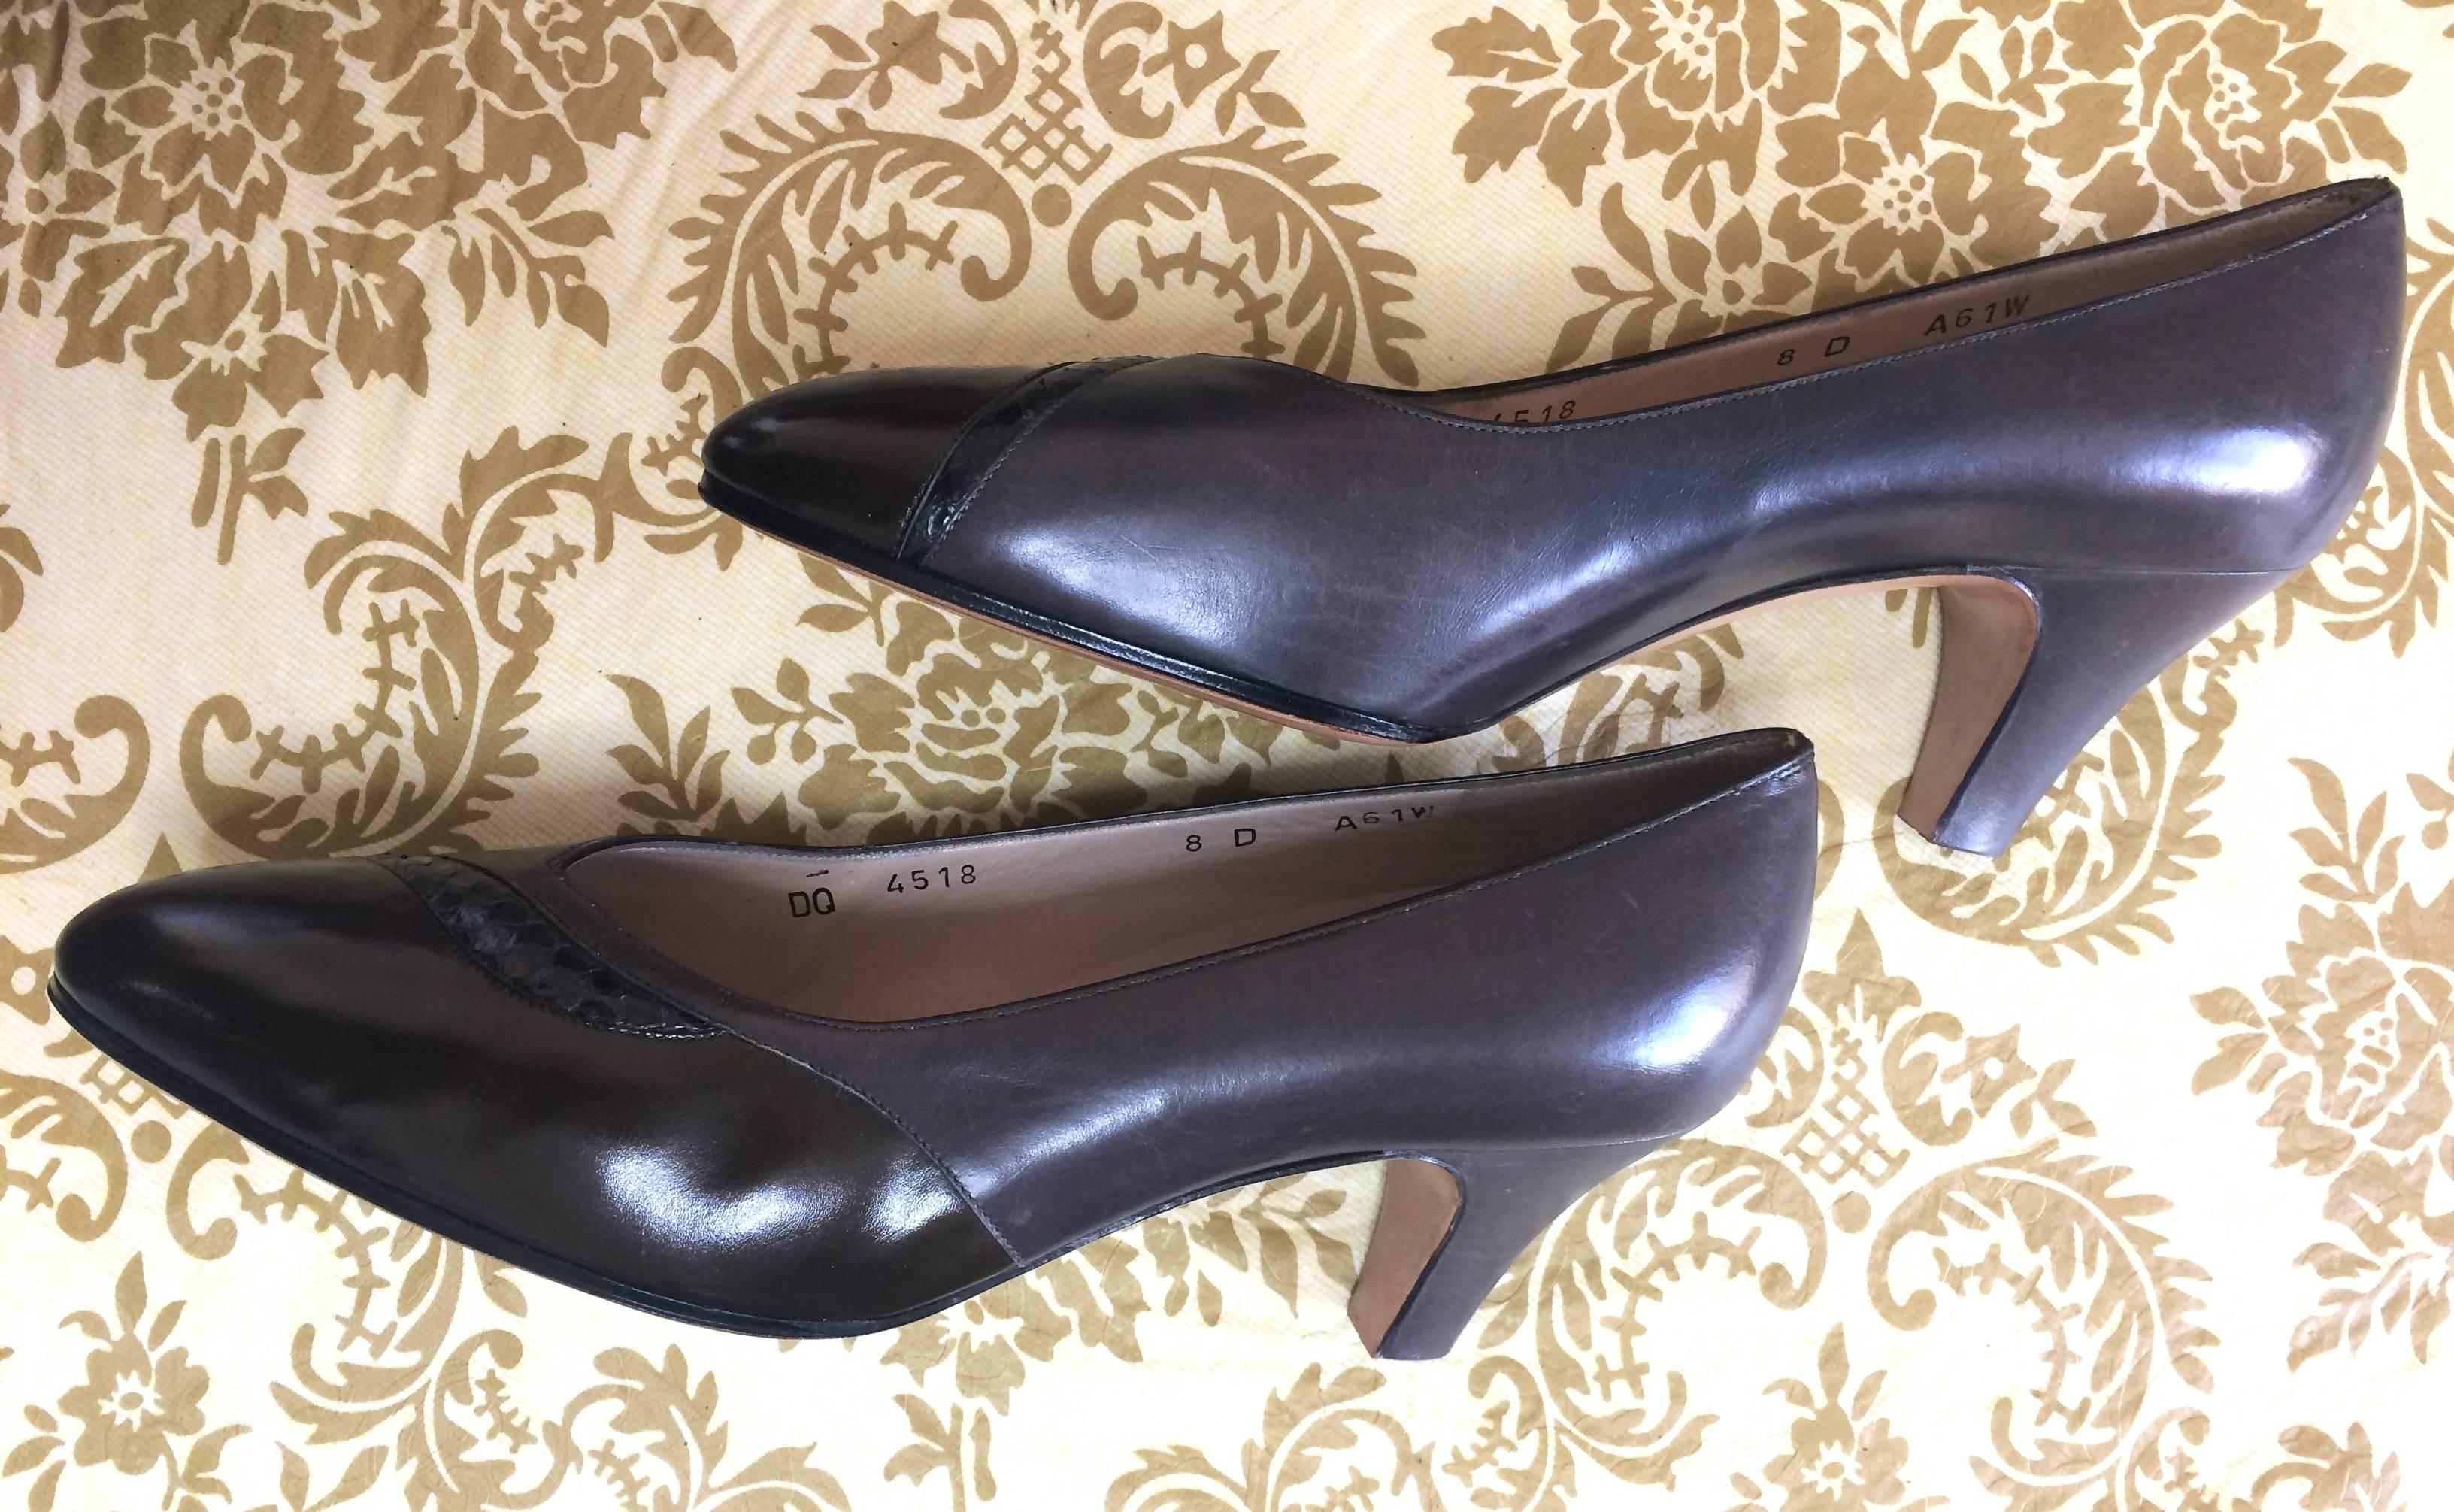 Vintage Salvatore Ferragamo grey and dark brown leather pumps with snakeskin. 8D In Good Condition For Sale In Kashiwa, Chiba